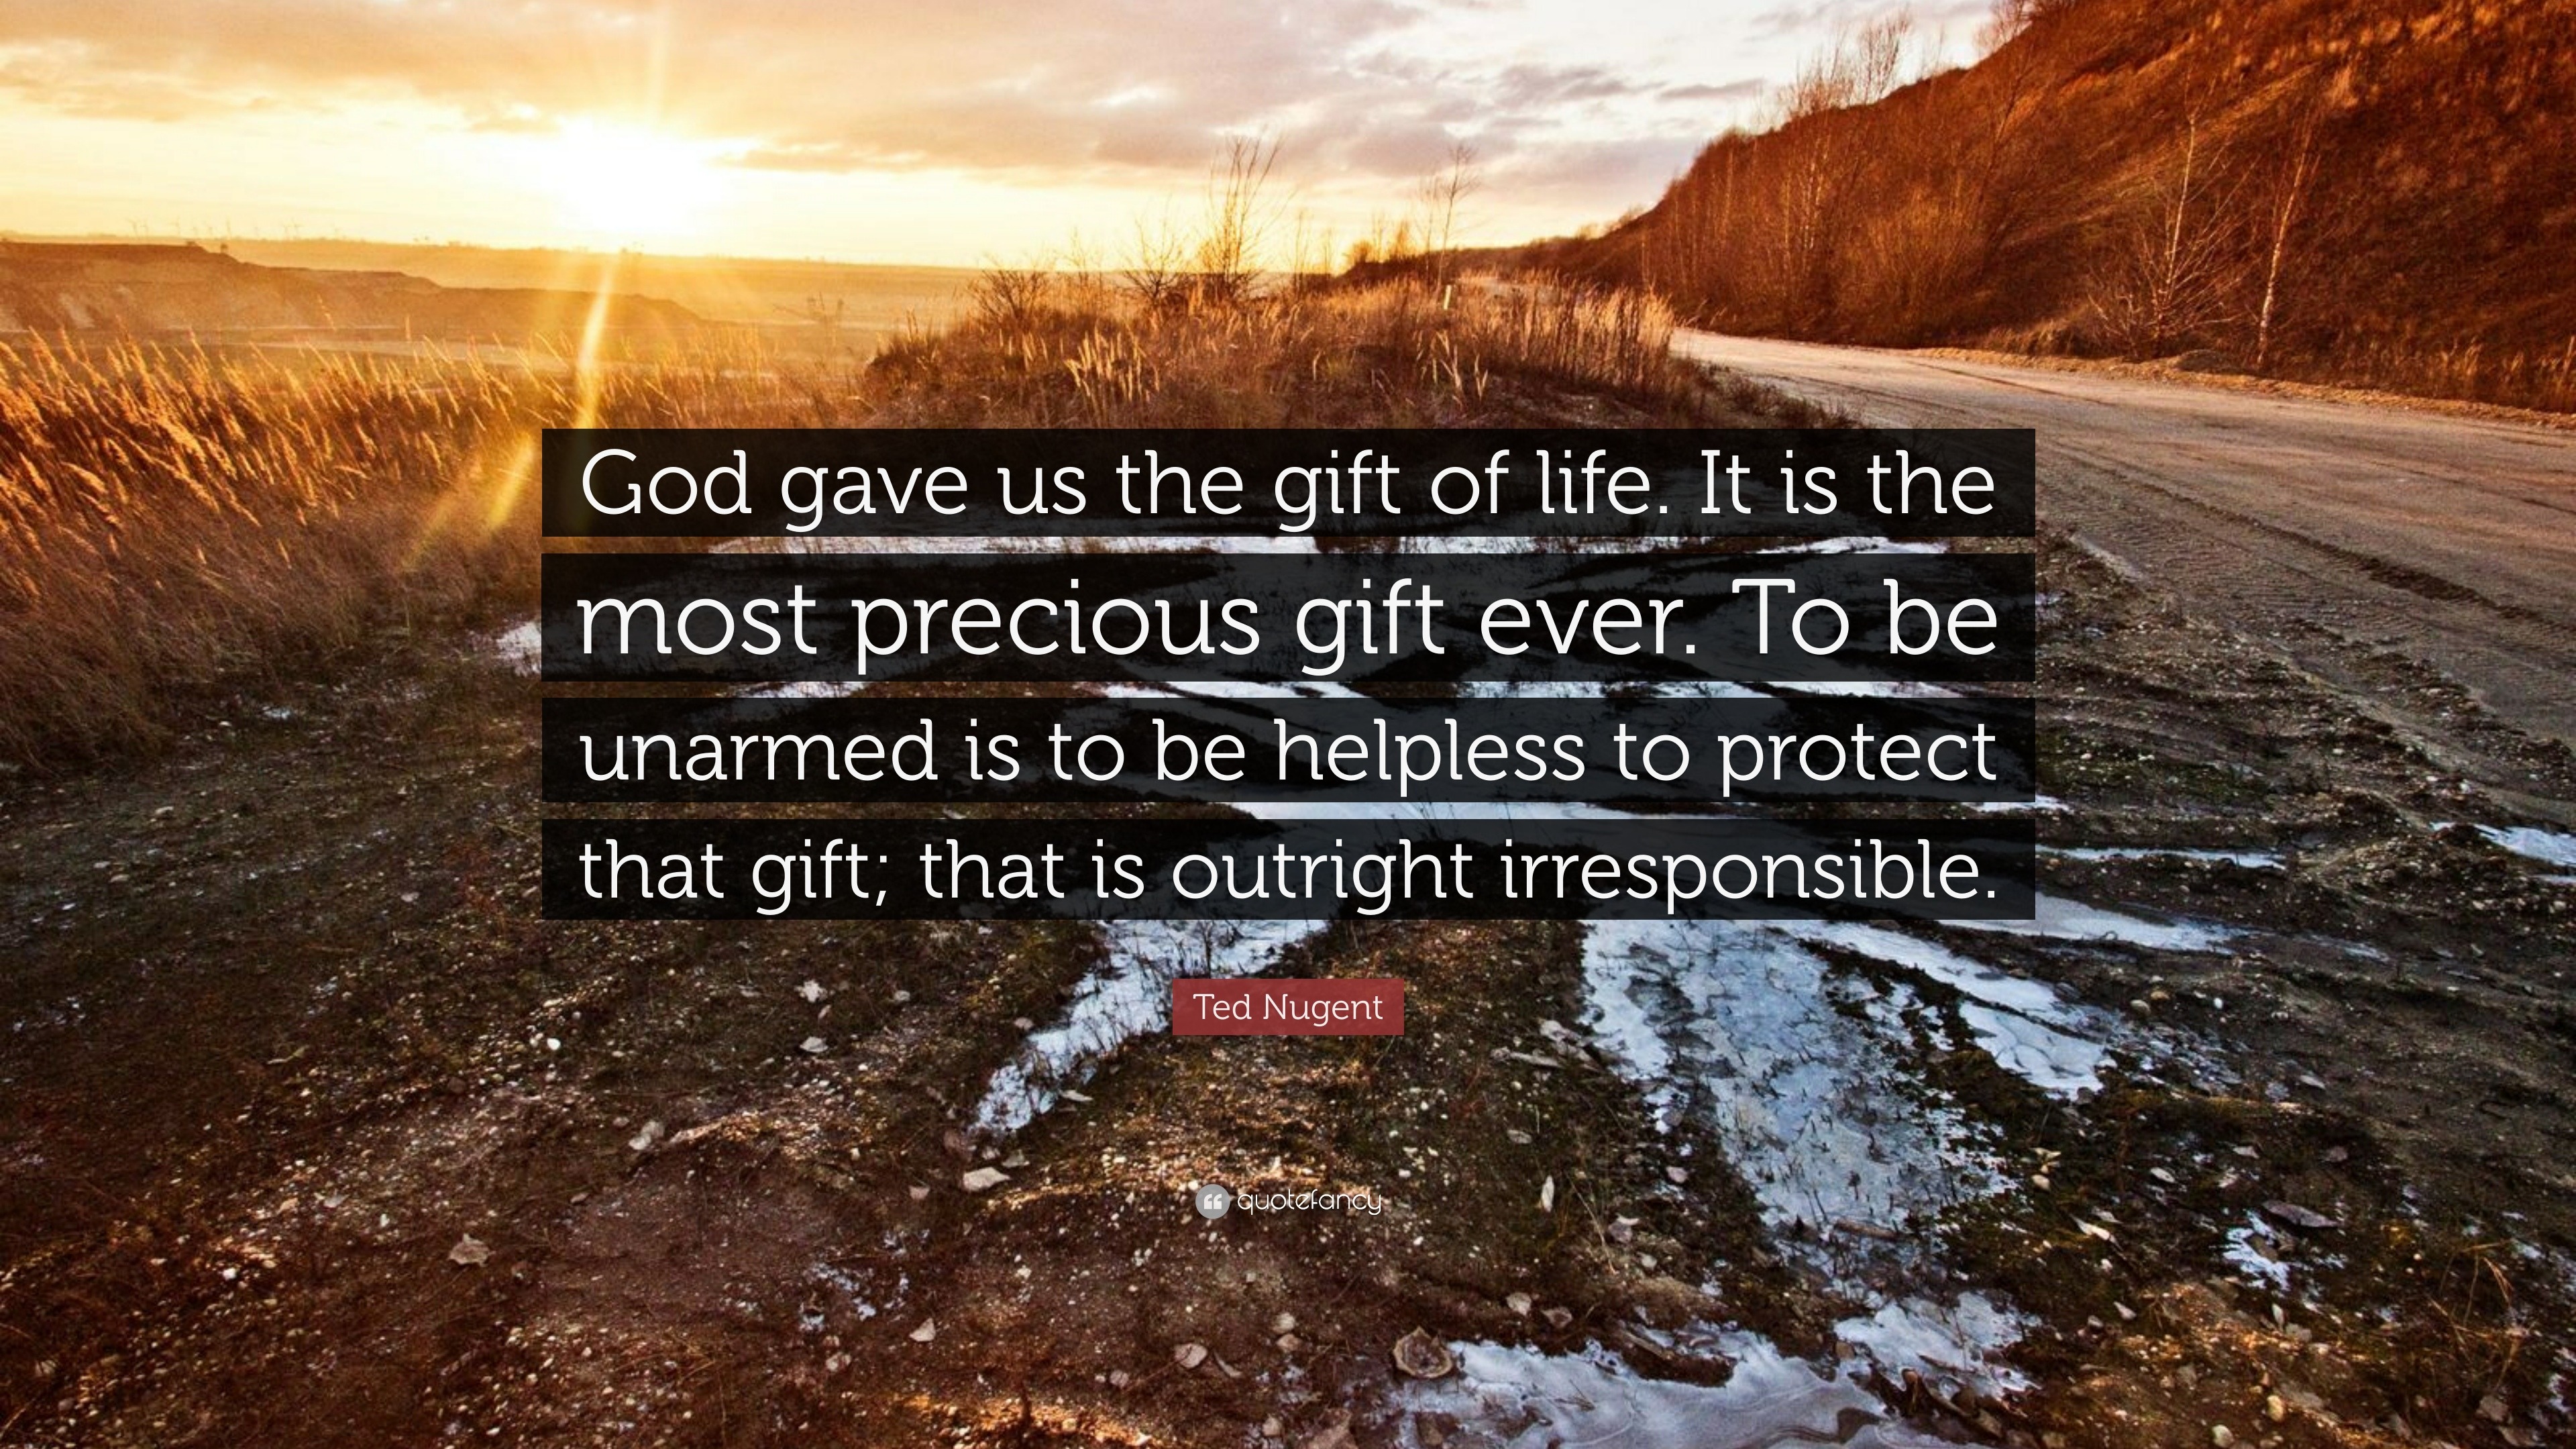 Why life is a precious gift from God? - YouTube